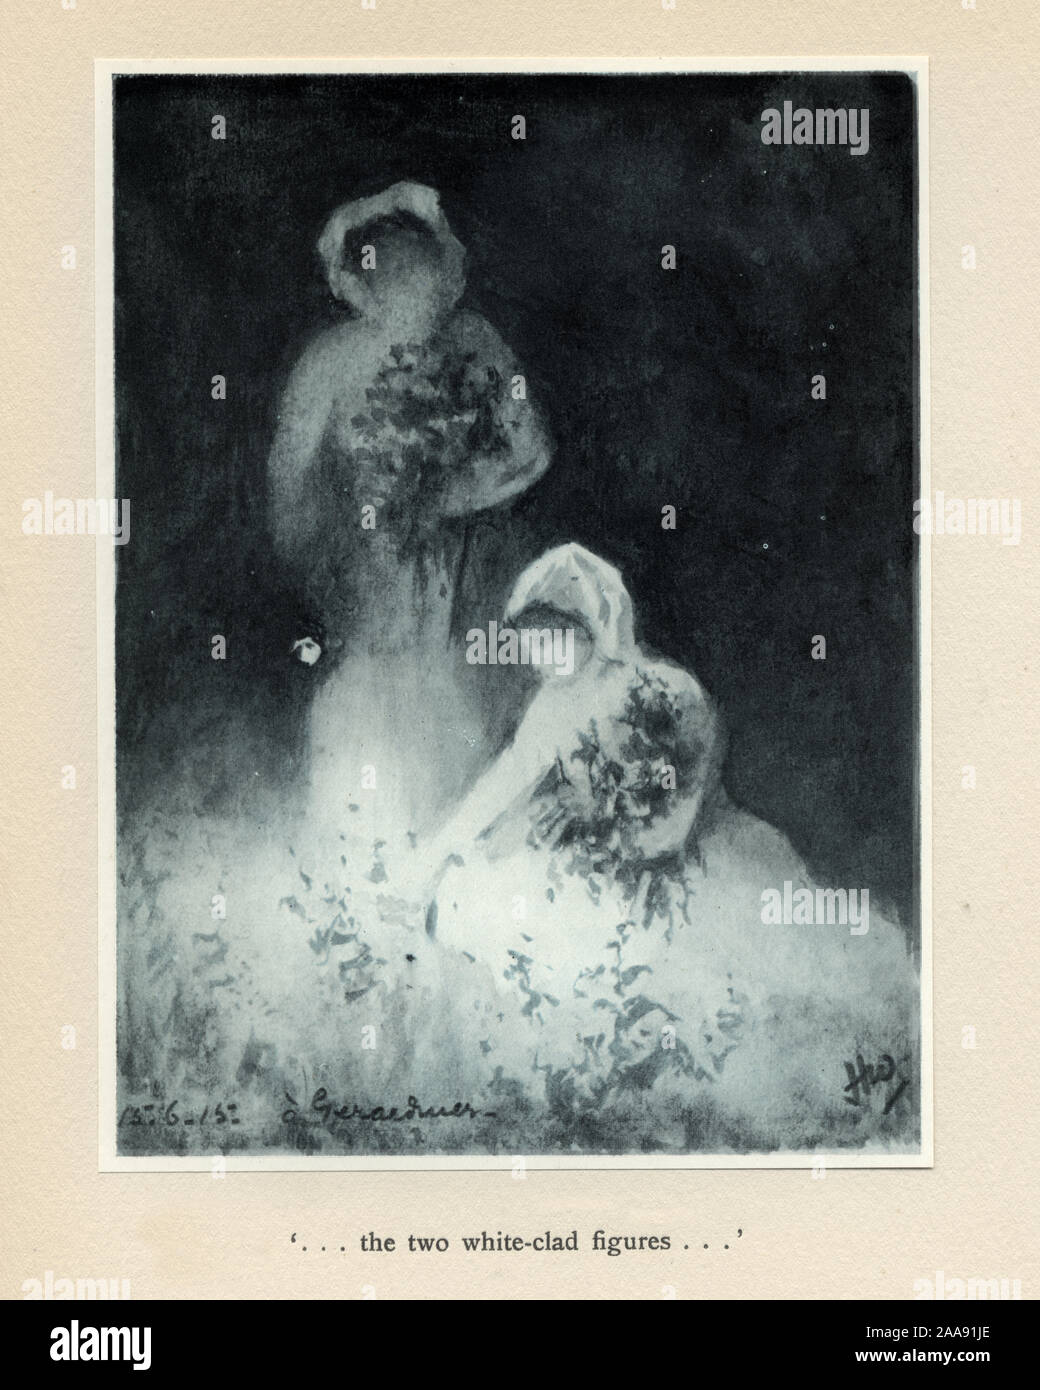 World Ward One, Ghostly figures of women laying flowers at a soldier grave, 1915. .. the two white-clad figures Mr Poilu, by Herbert Ward. Stock Photo